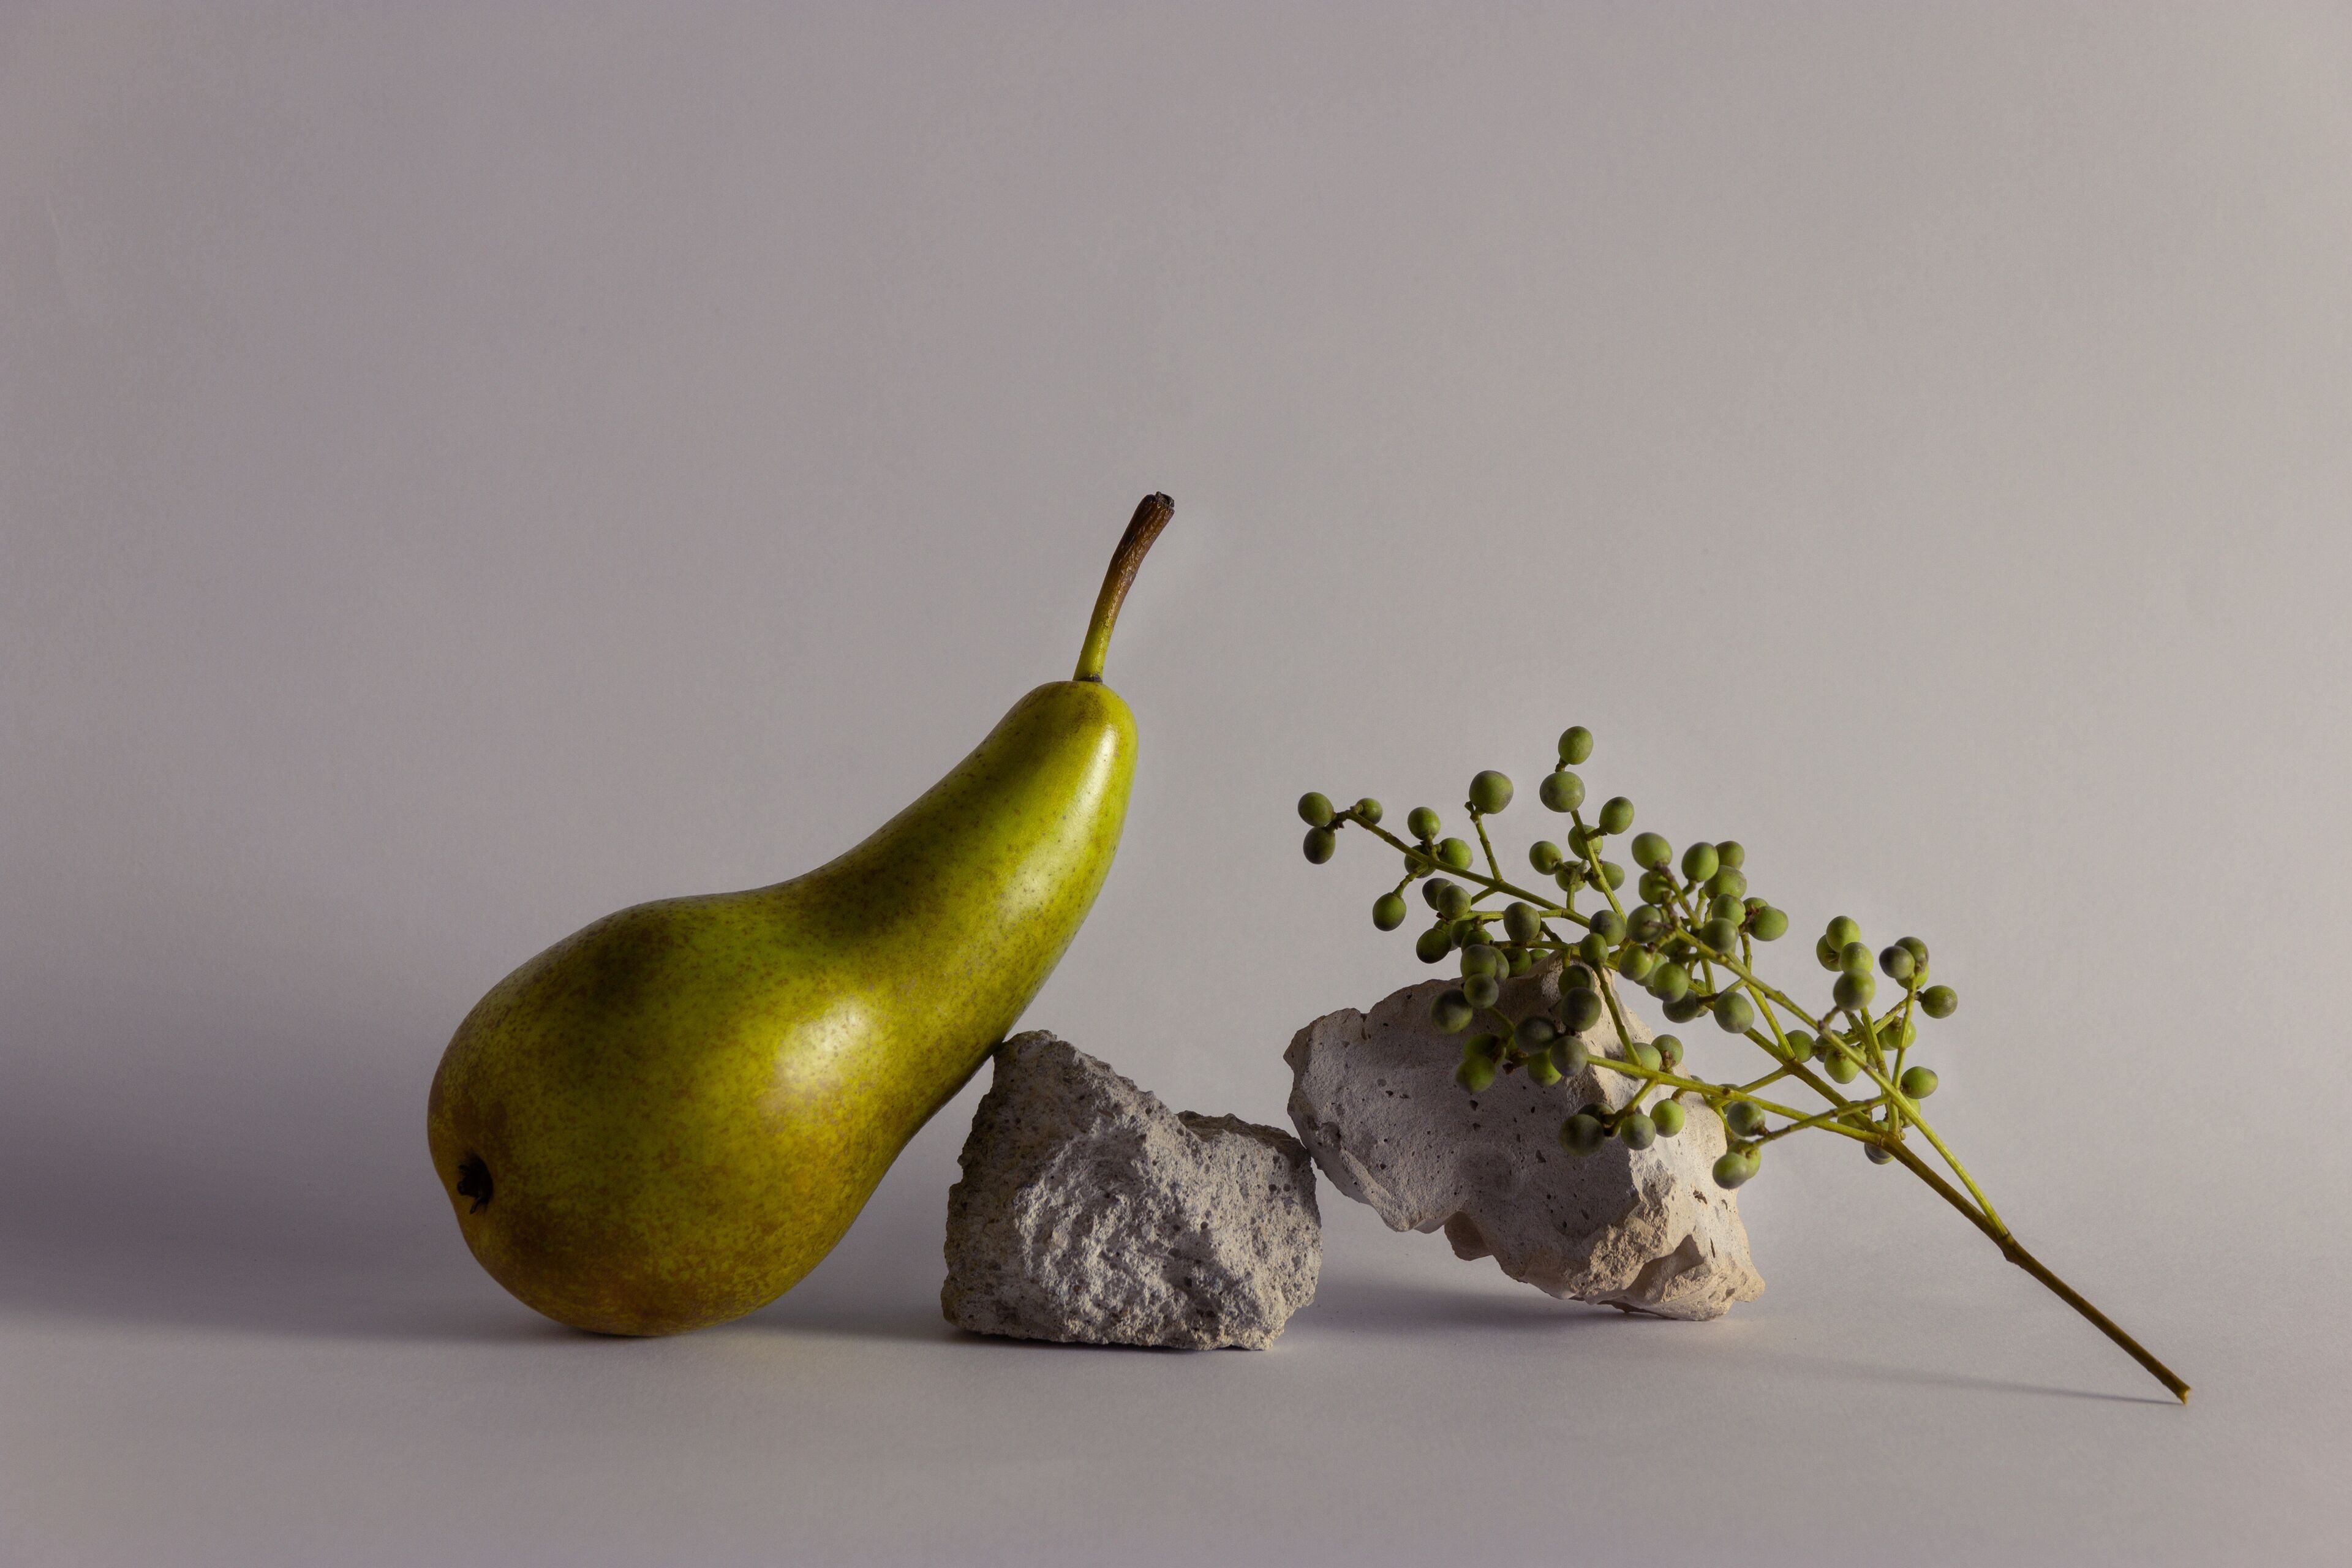 A pear and small berries with stones arranged in a simple, elegant still life setup.